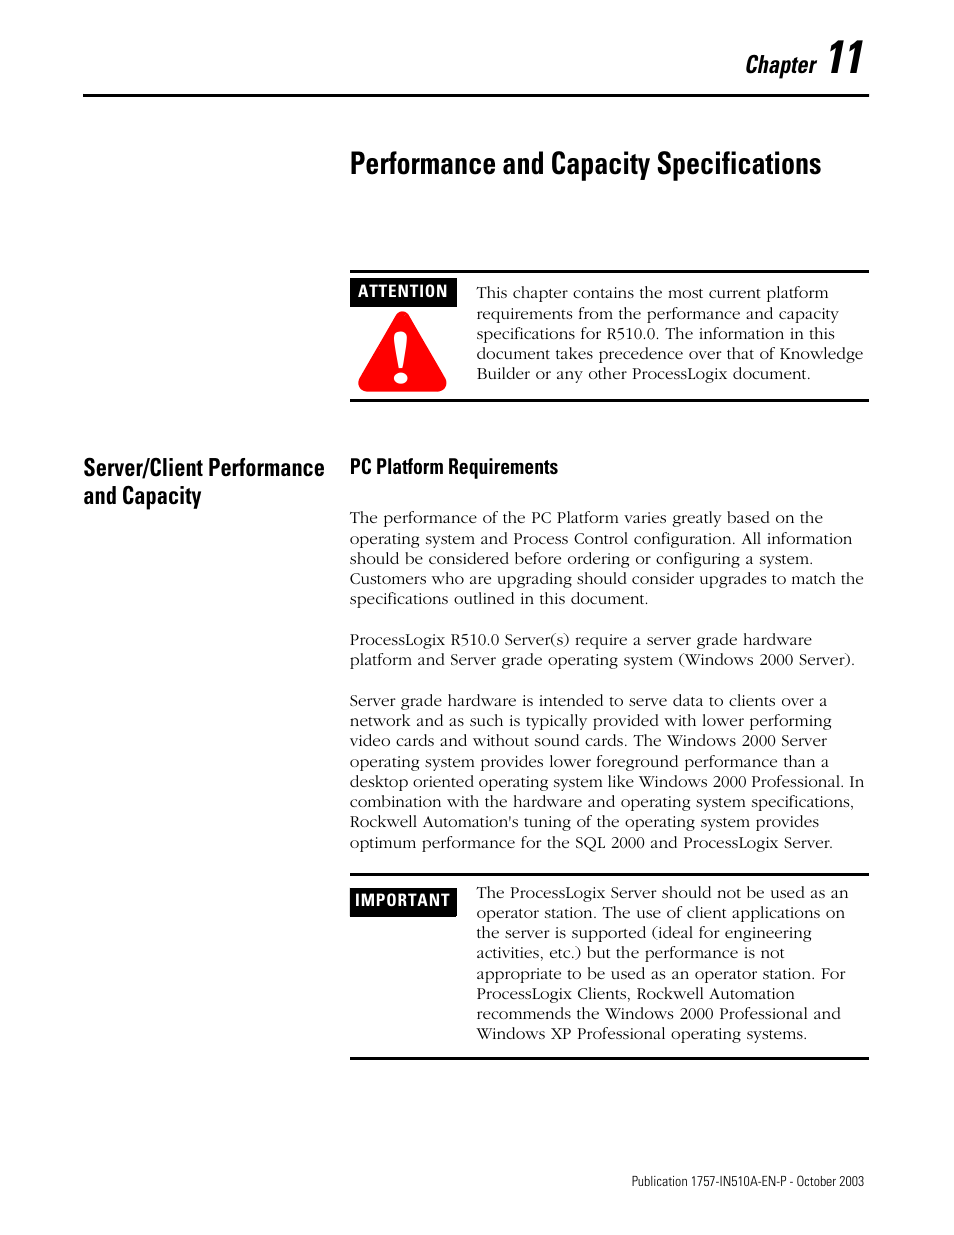 11 - performance and capacity specifications, Server/client performance and capacity, Pc platform requirements | Chapter 11, Performance and capacity specifications, Server/client performance and capacity -1, Pc platform requirements -1 | Rockwell Automation 1757-SWKIT5100 ProcessLogix R510.0 Installation and Upgrade Guide User Manual | Page 241 / 271